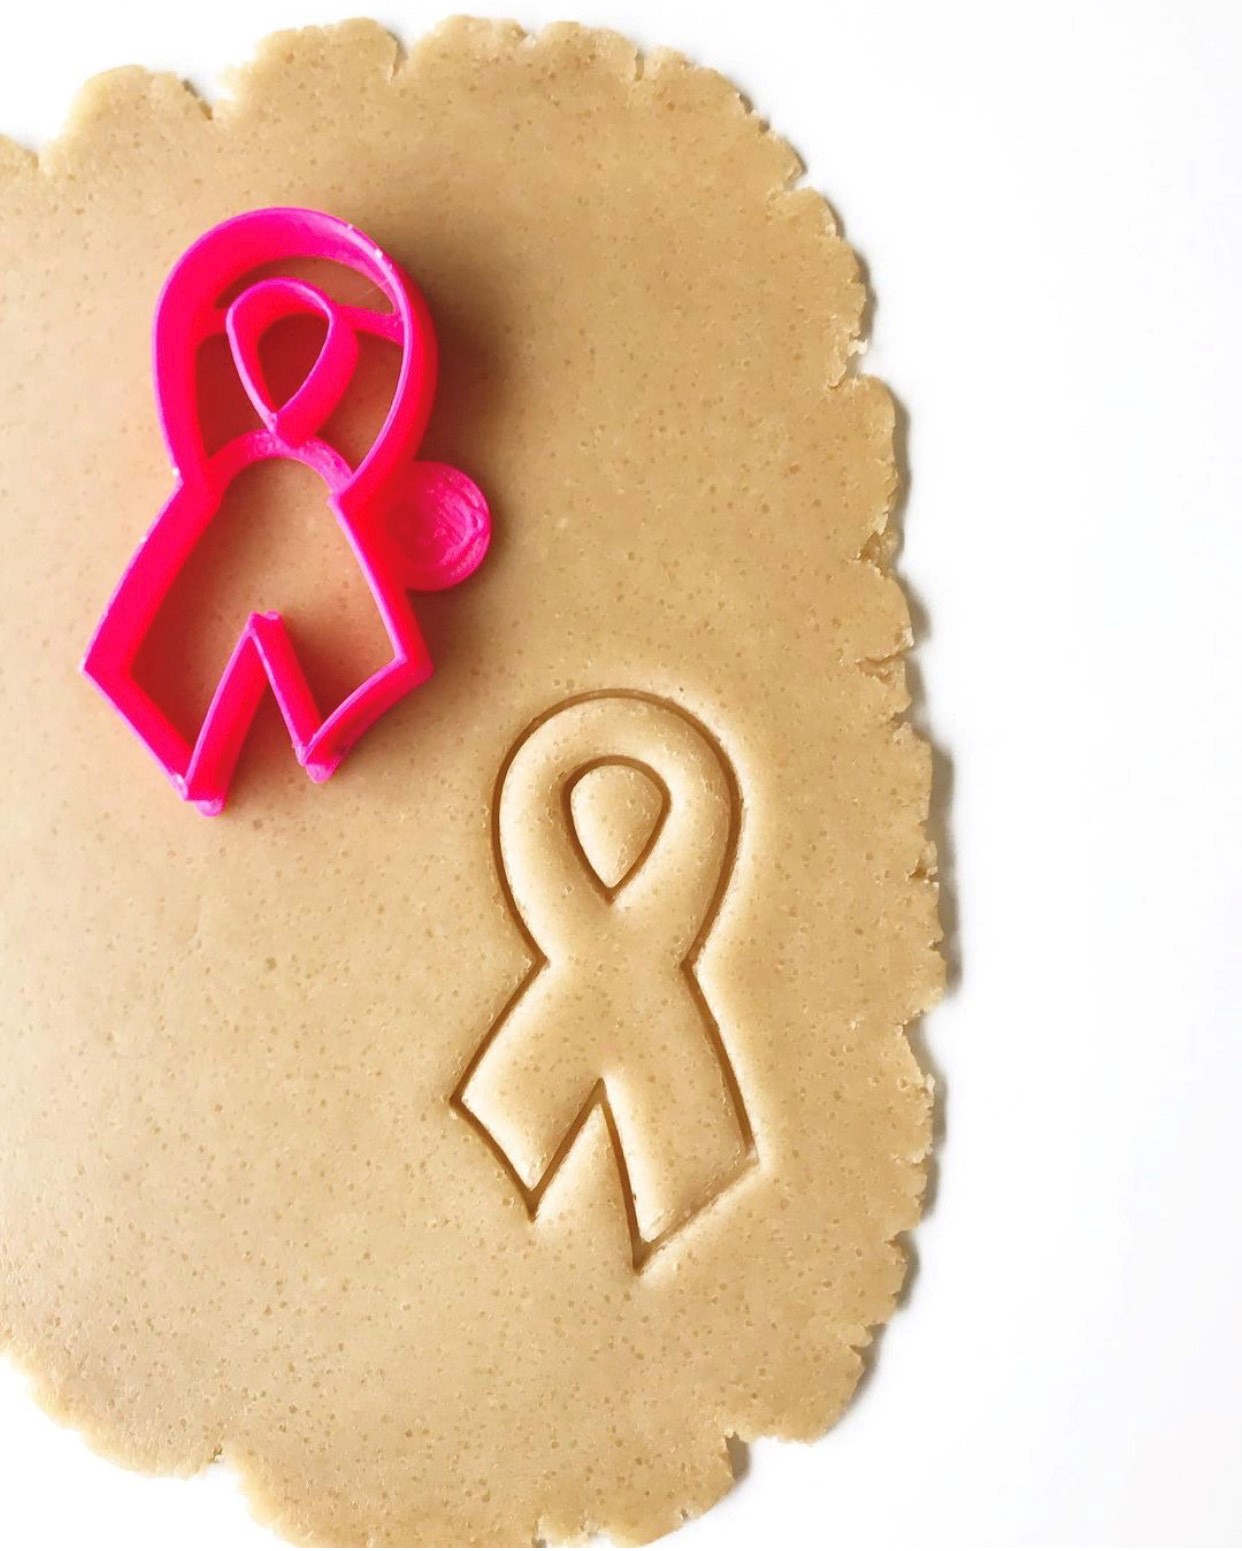 Cancer Ribbon Cookie Cutter